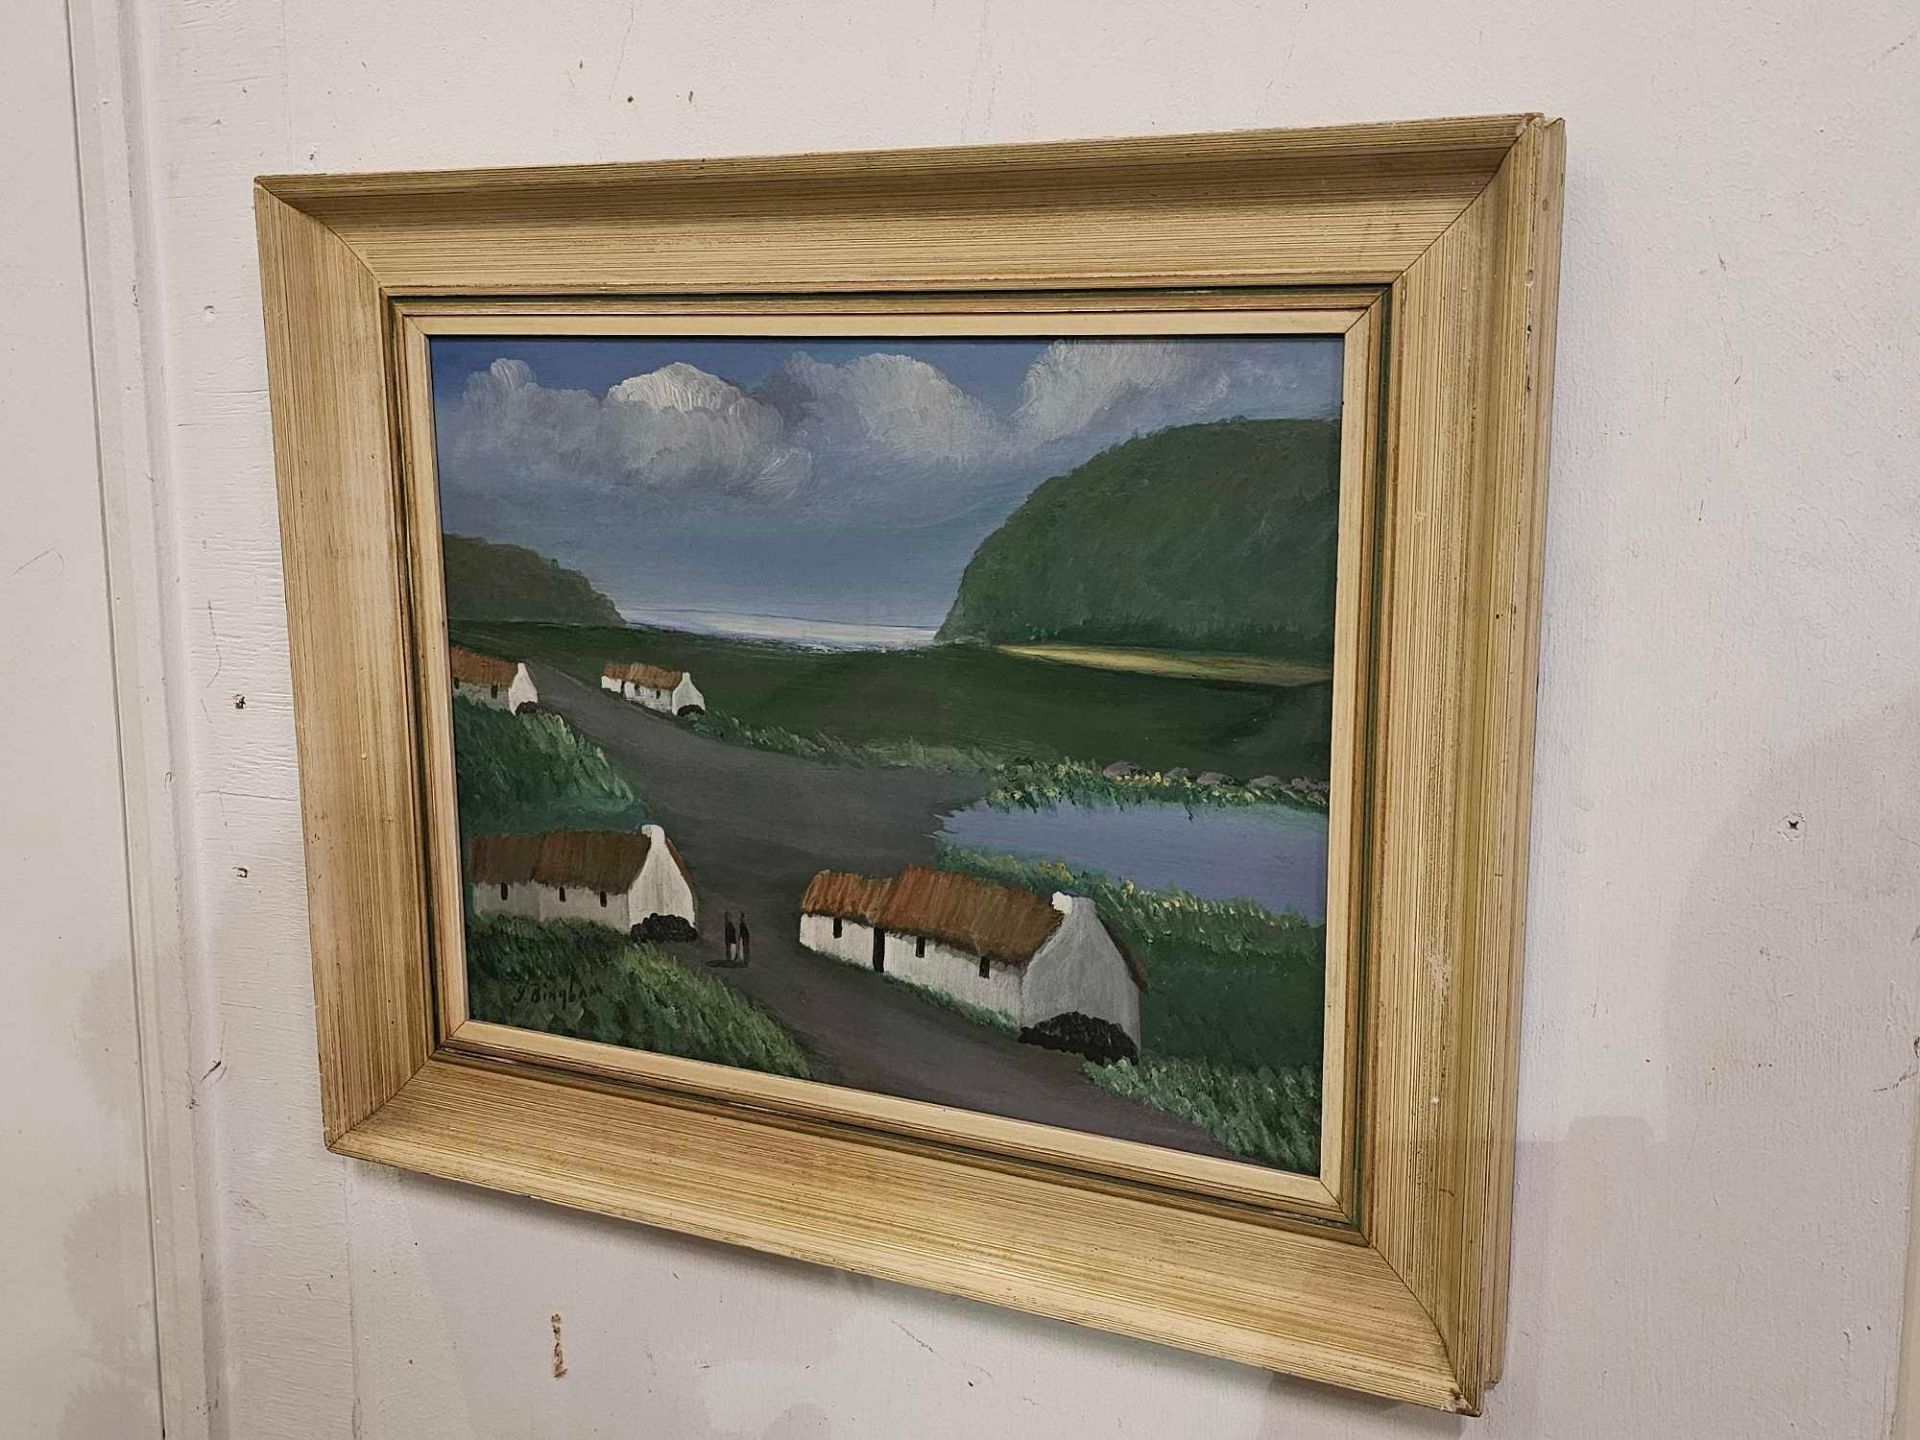 Cottages Donegal  Oil on Board By Jimmy Bingham  (1925-2009) 48 x 58cm James Bingham was born in - Image 3 of 5